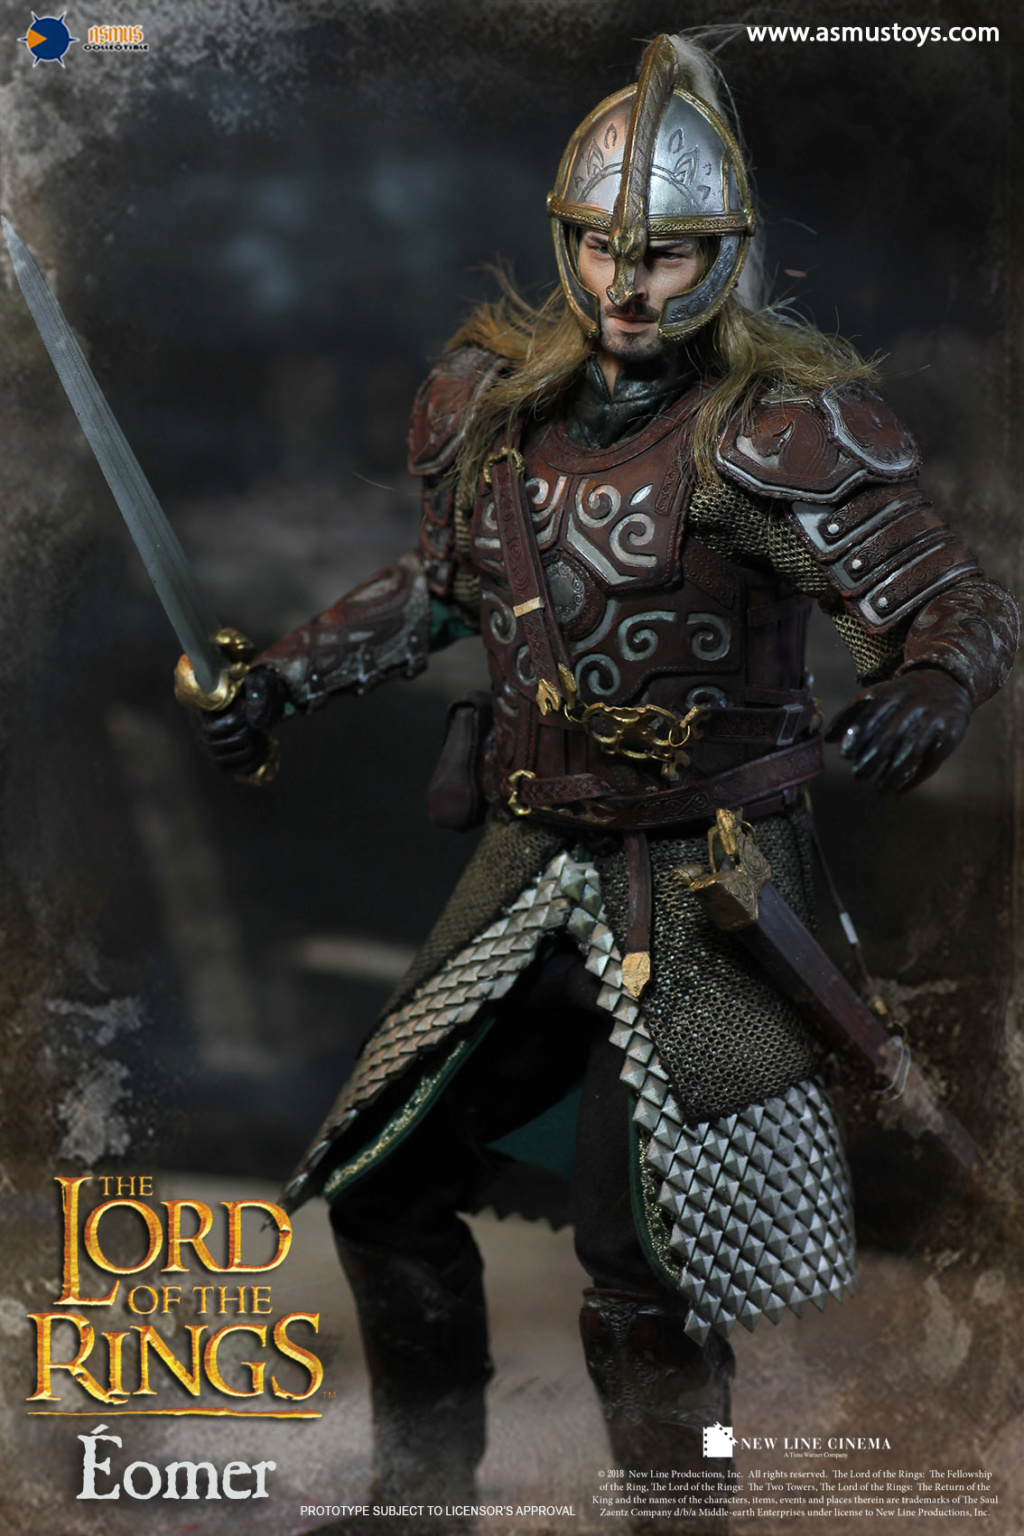 LordoftheRings - NEW PRODUCT: ASMUS TOYS THE LORD OF THE RING SIRIES: ÉOMER  (Product ID: LOTR011) 1/6 scale figure Em002010